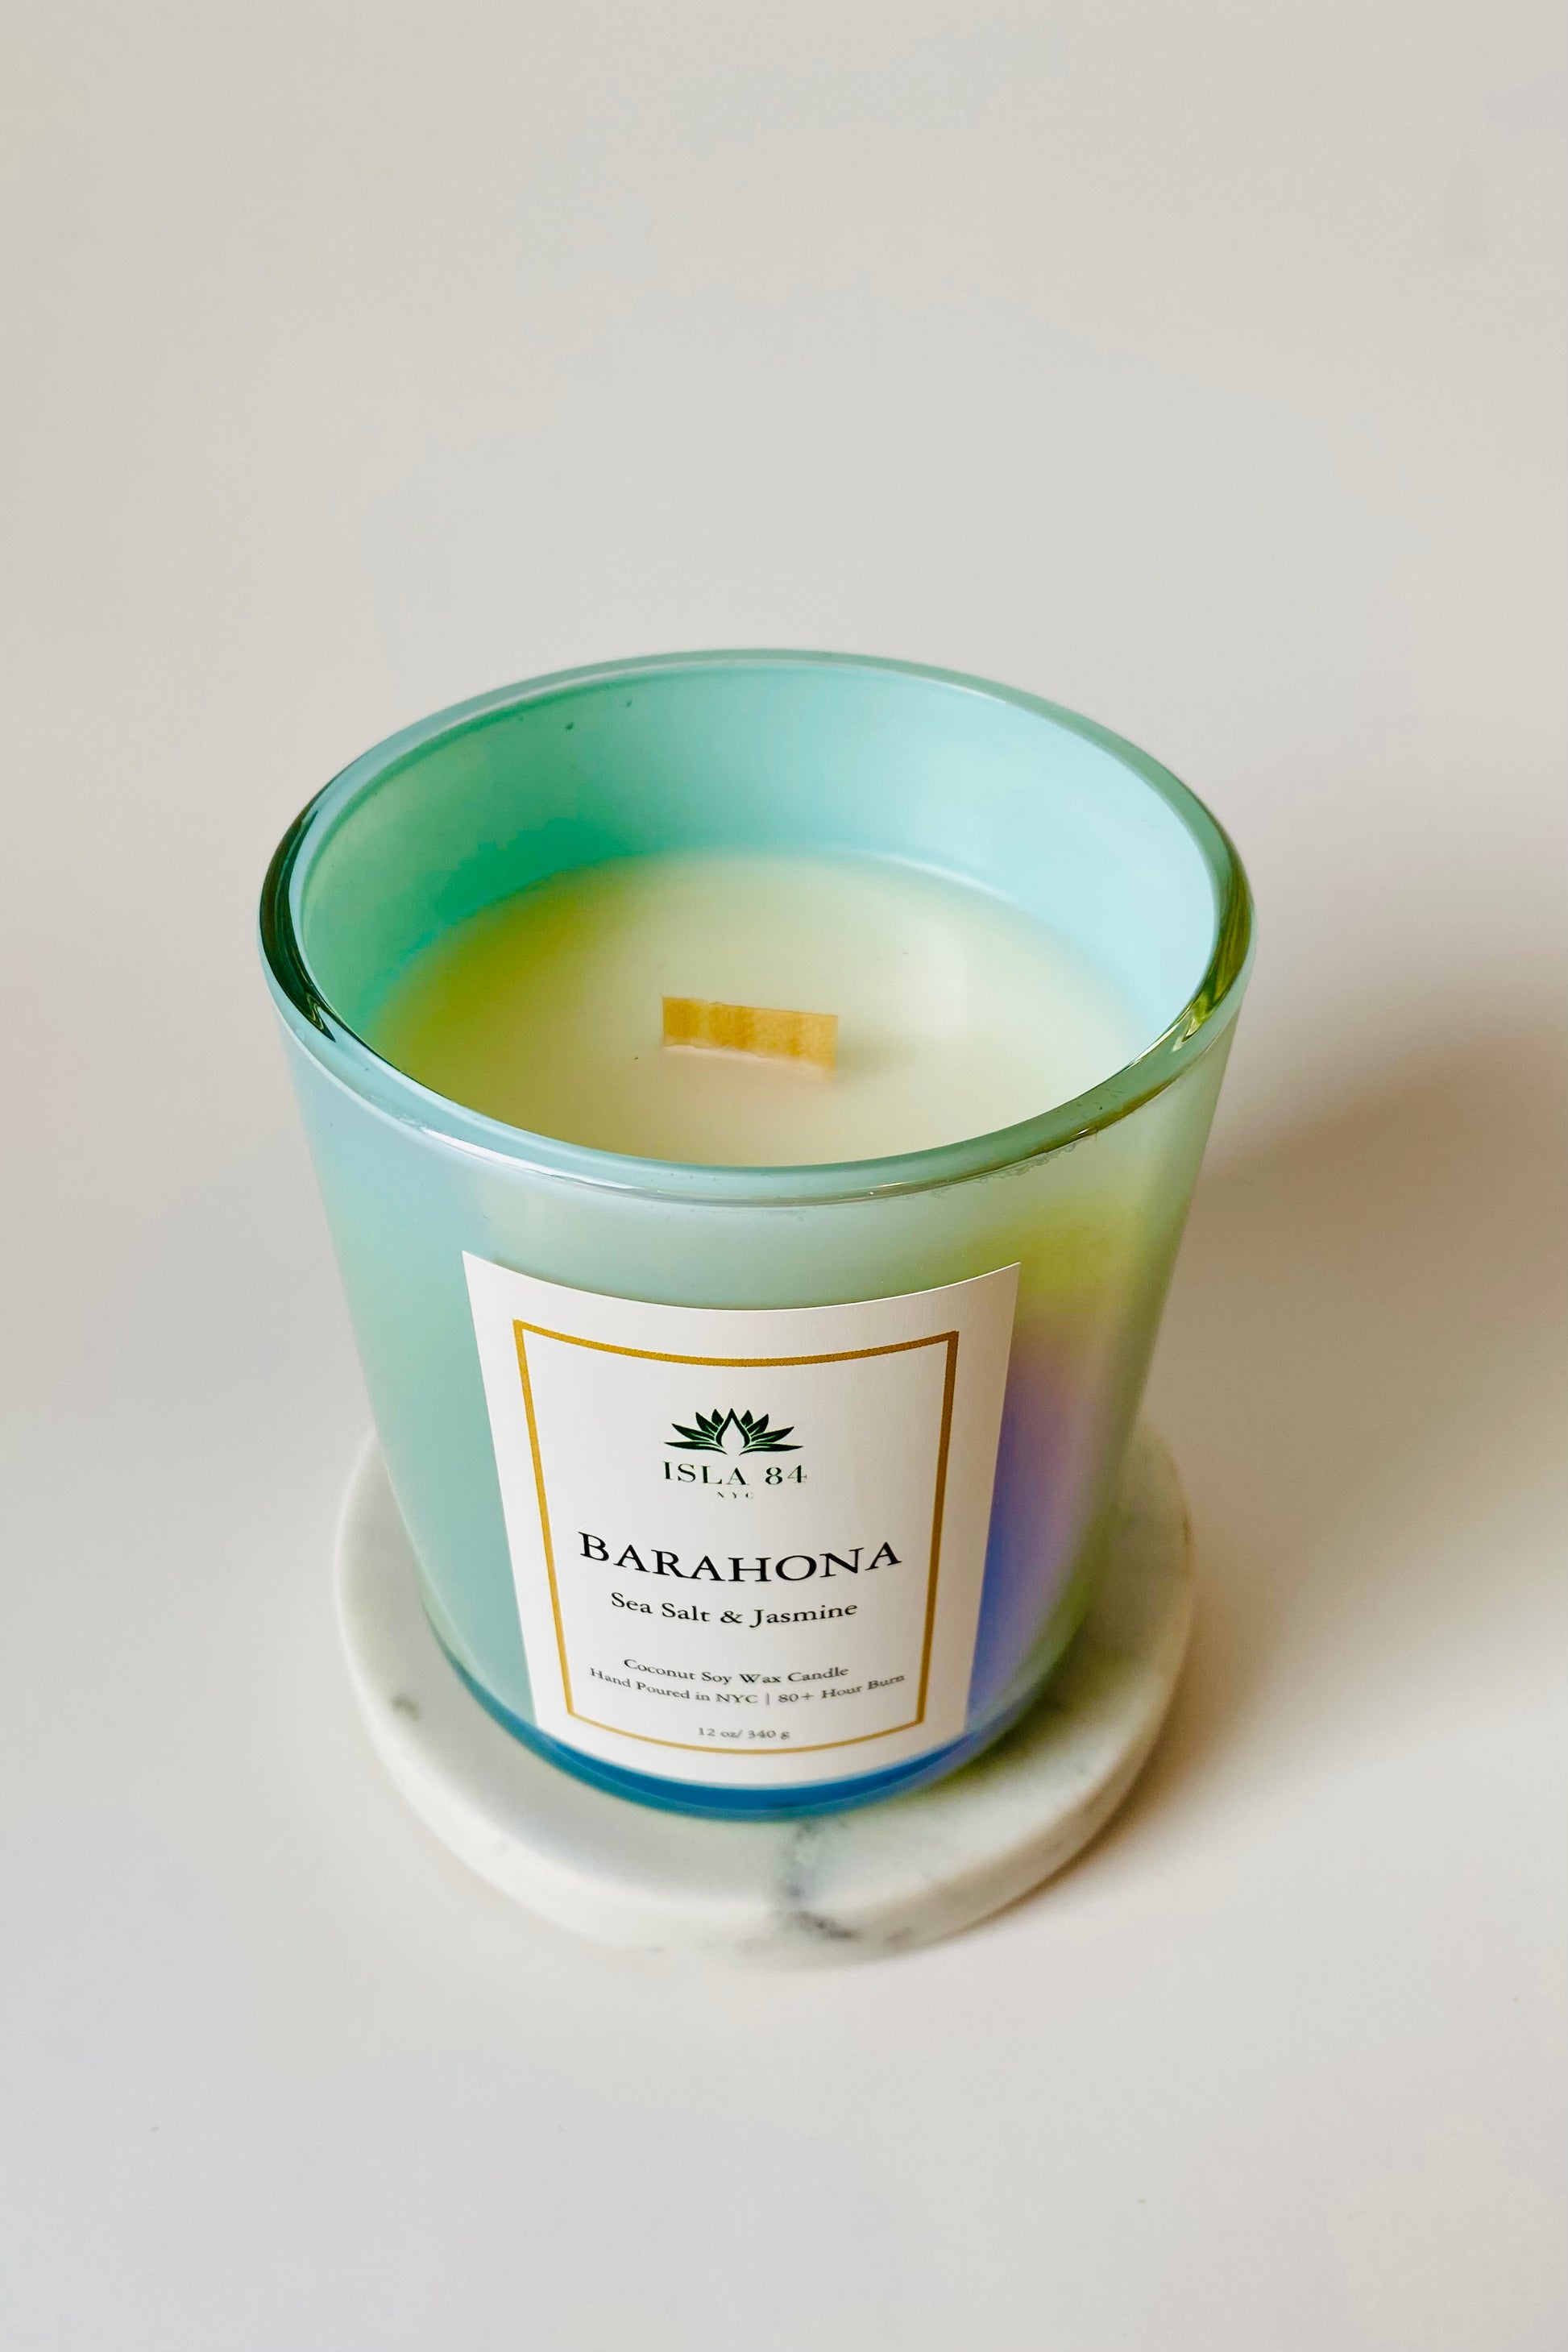 Barahona Signature Scented Candle; Dominican Republic Candle; Velas Aromatica Republica Dominicana; Coconut Soy wax candle with wood wick.